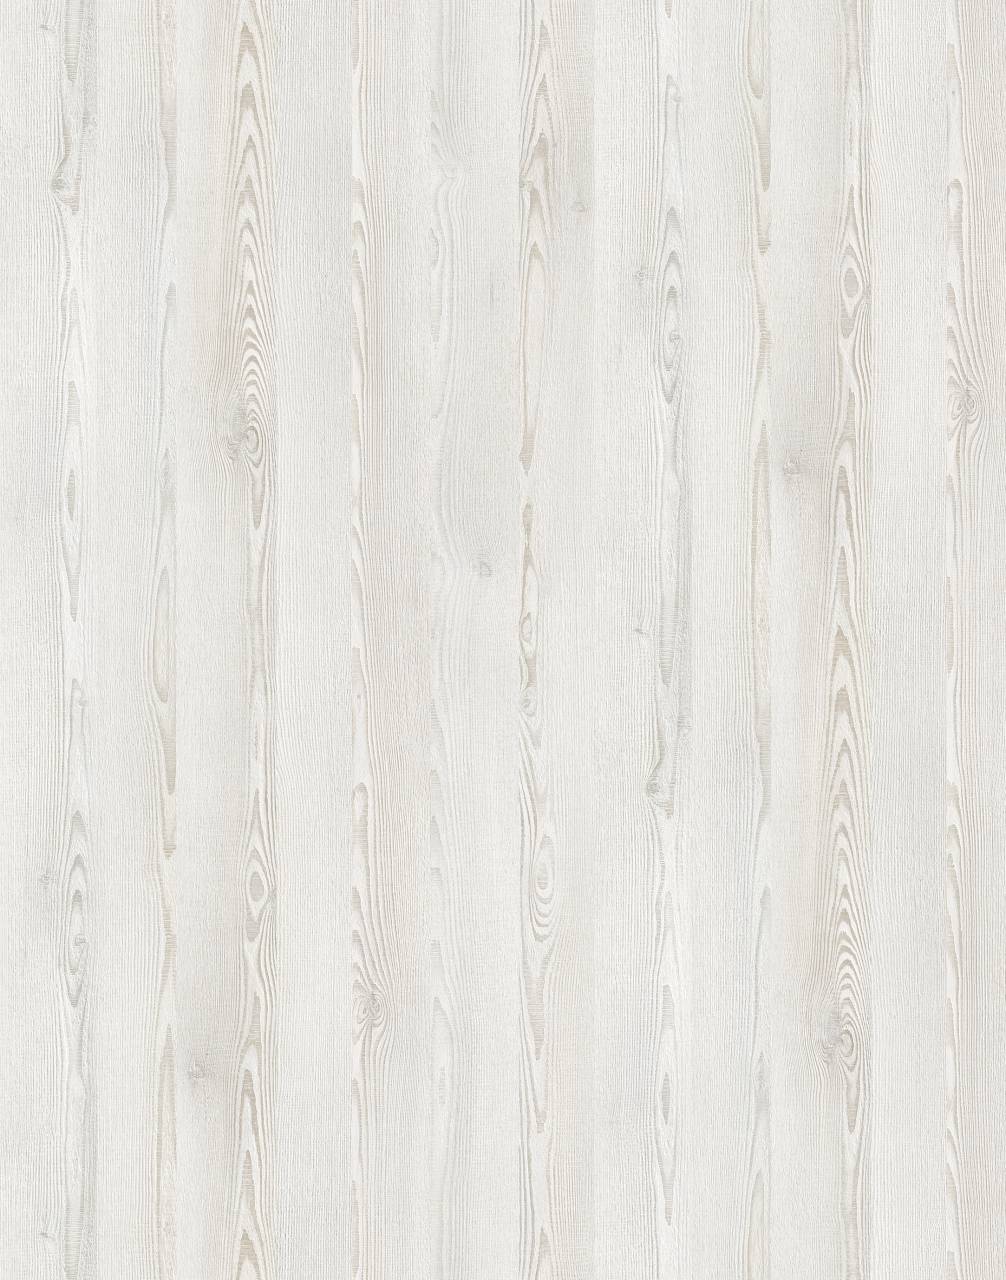 White Loft Pine SN HPL with textured surface and crisp white tones for a fresh and contemporary look.